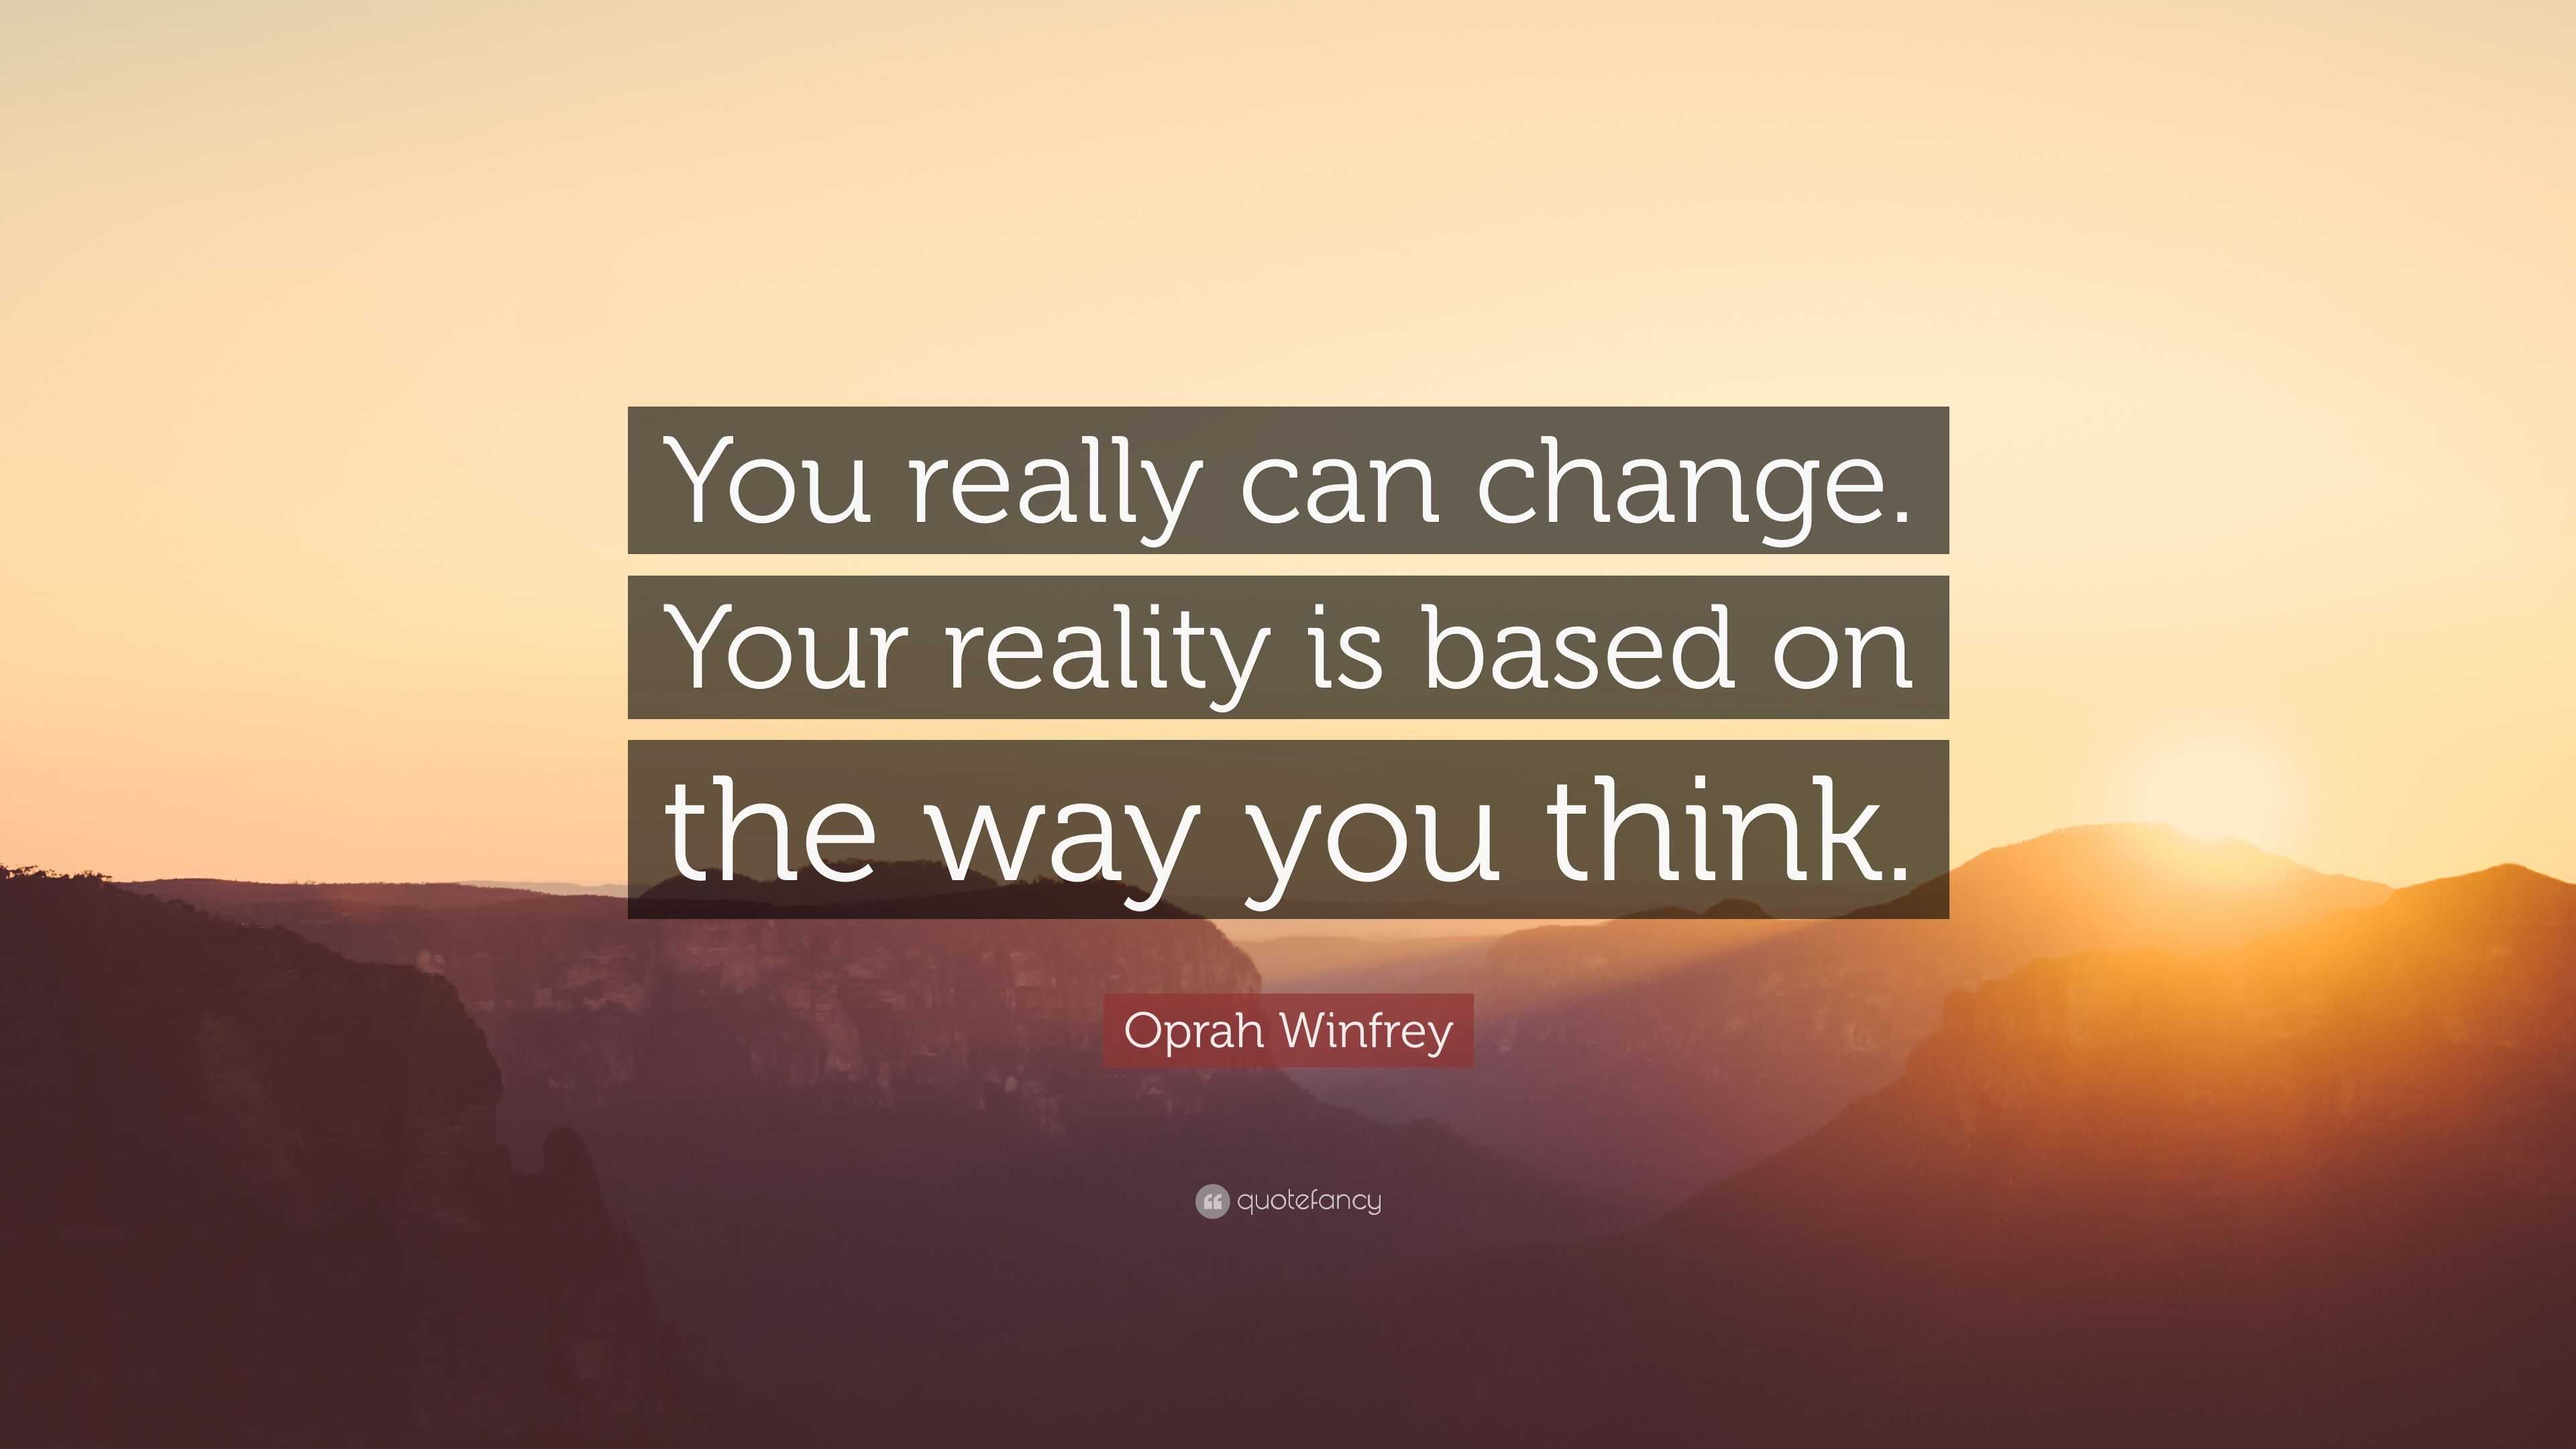 Oprah Winfrey Quote: “You really can change. Your reality is based on ...